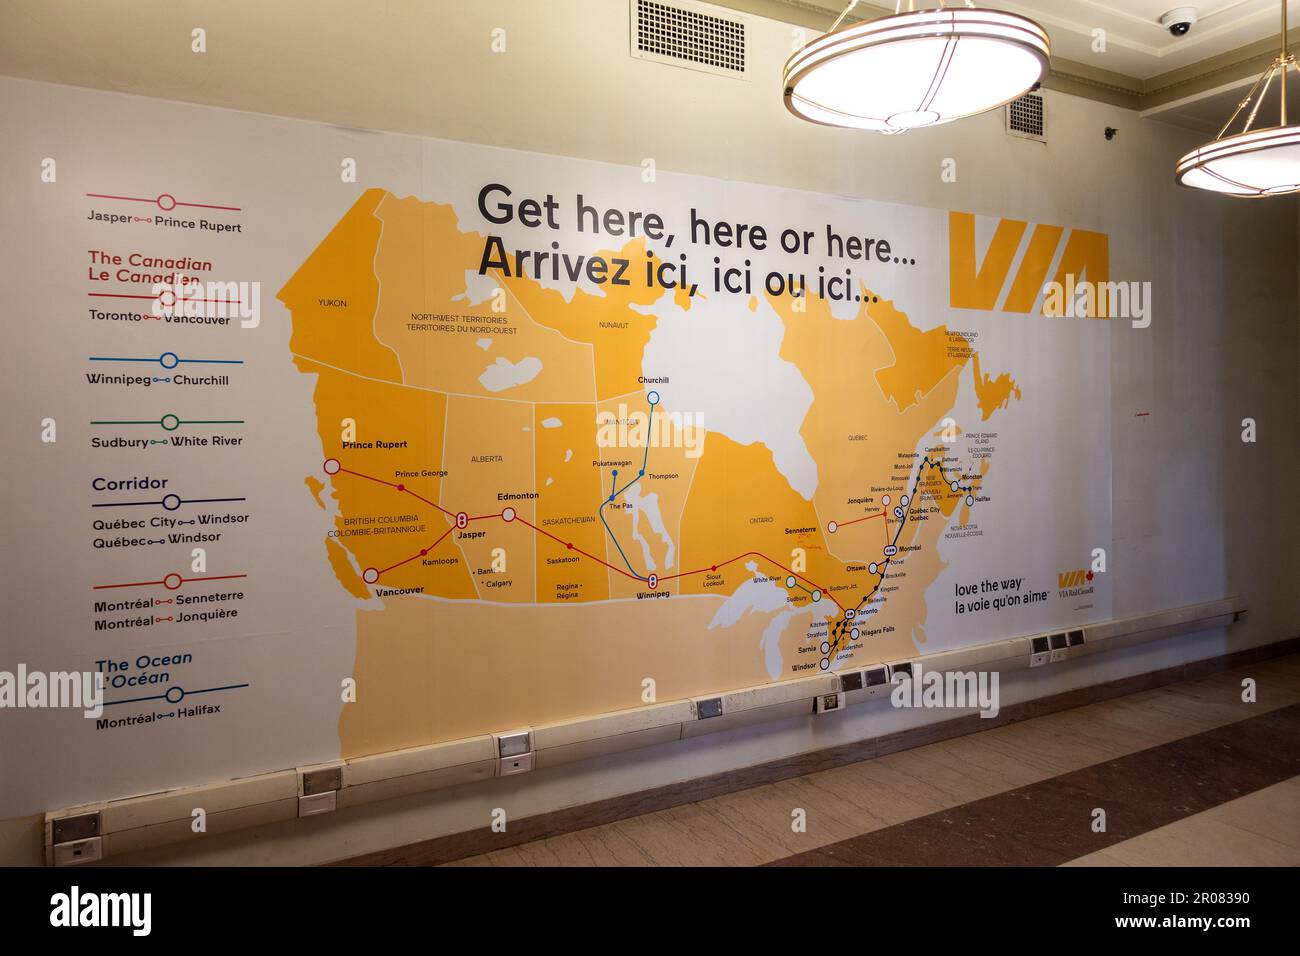 Via Rail Canadian Route Map In Union Station Toronto Showing All The Passenger Rail Lines In Canada Served By Via Rail Stock Photo